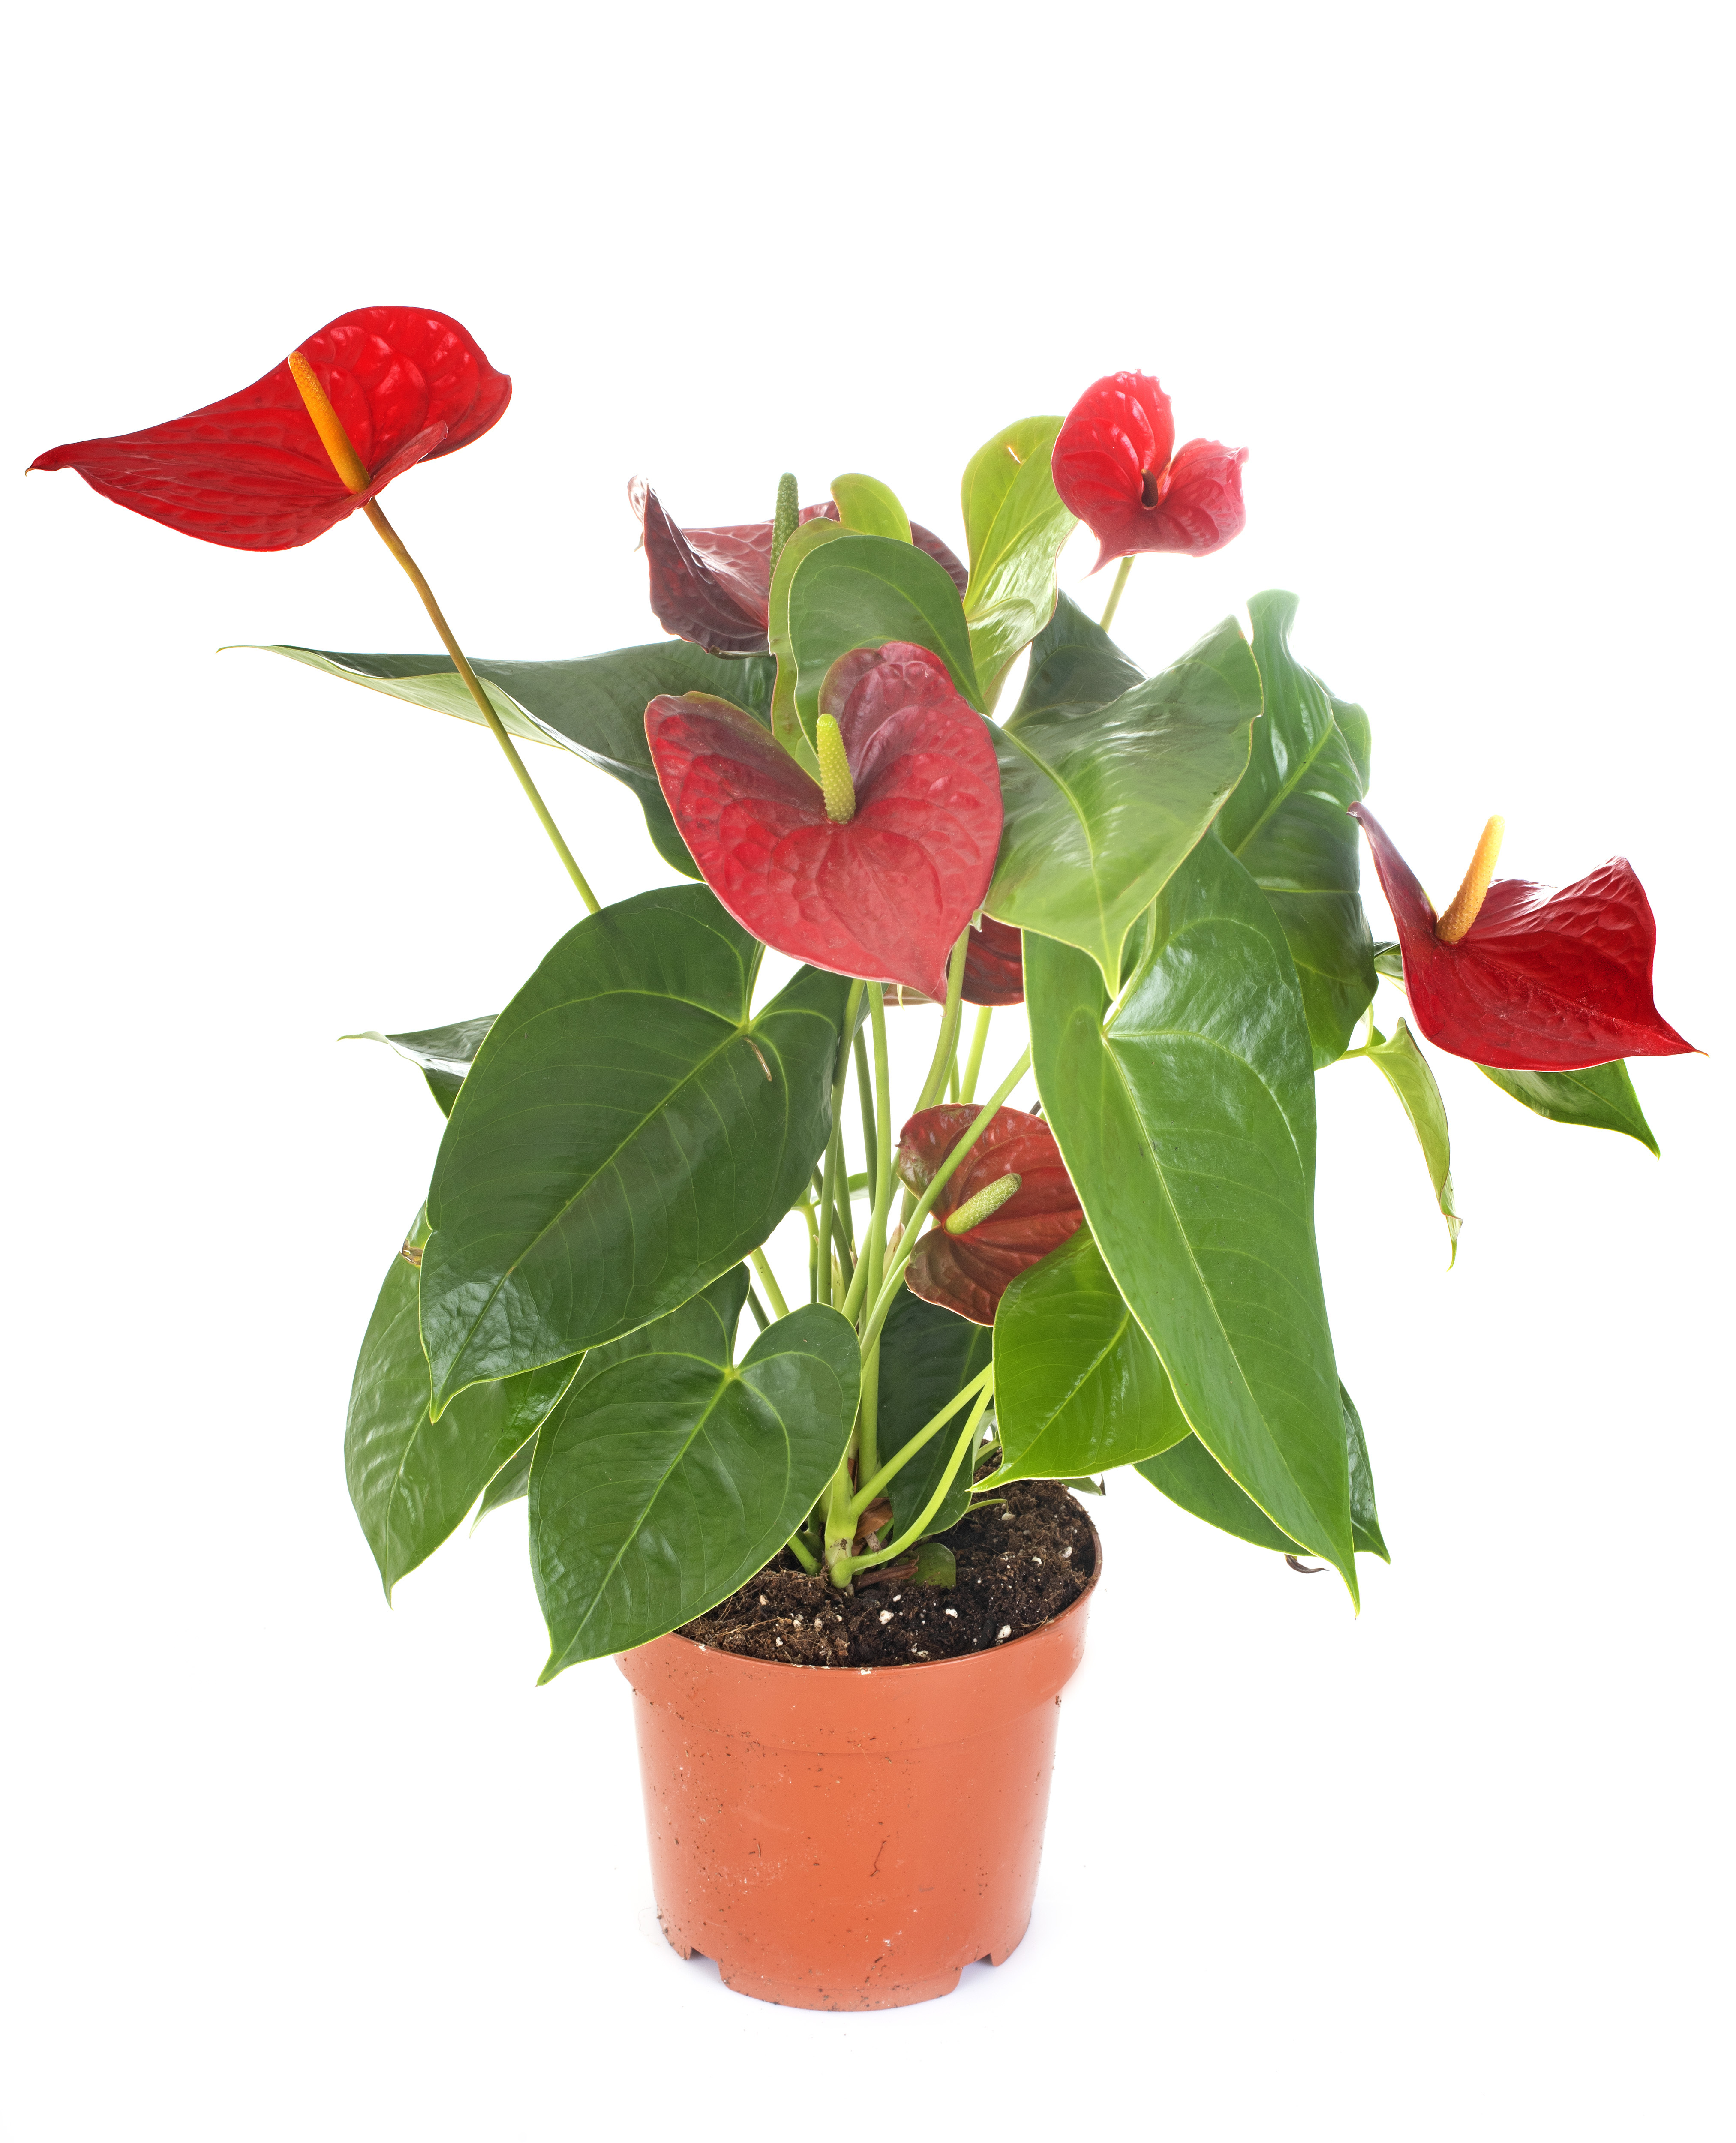 Potted anthurium plant in front of white background.